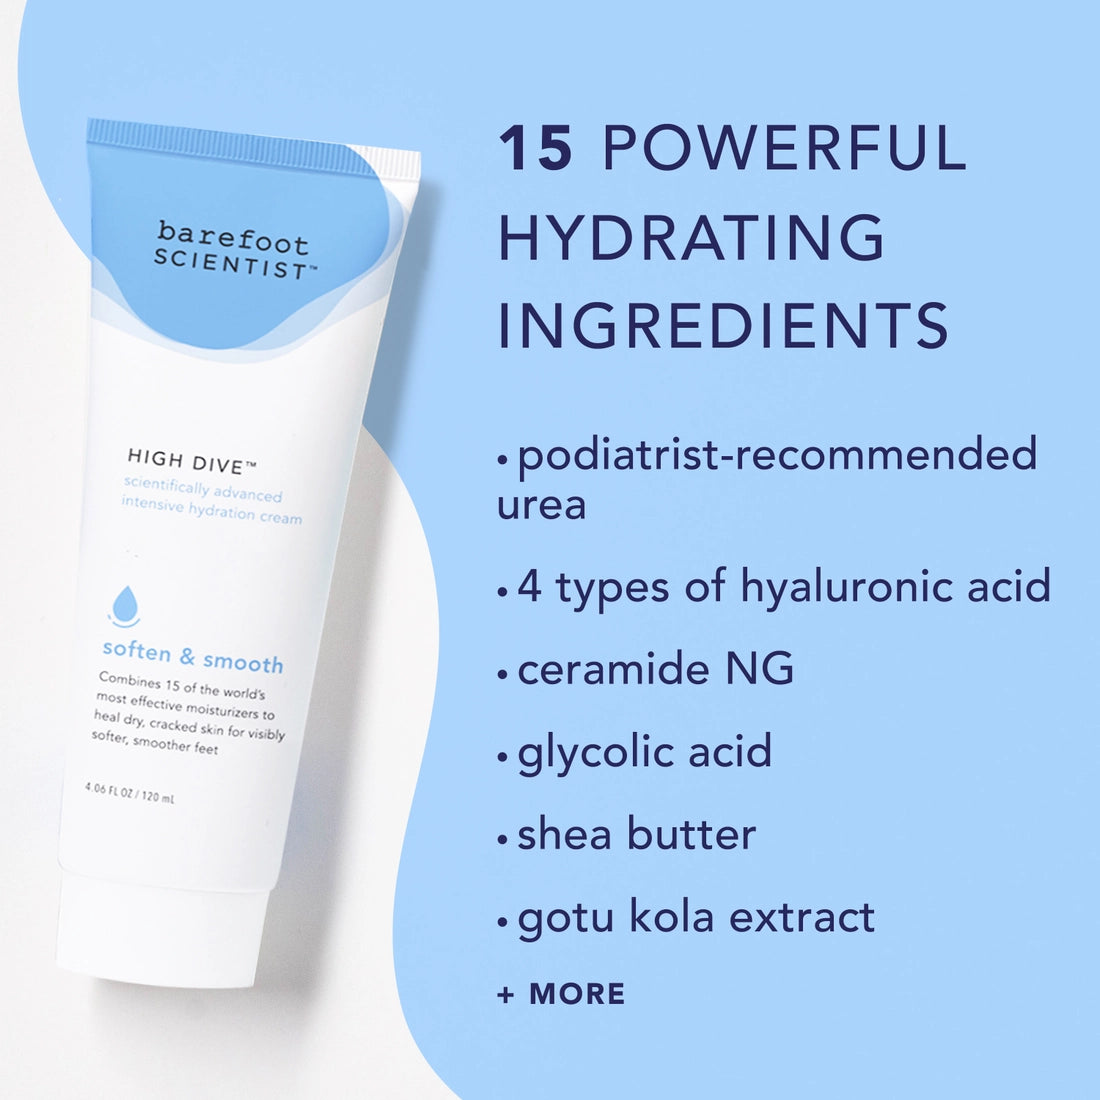 High Dive Intensive Hydration Cream for Feet